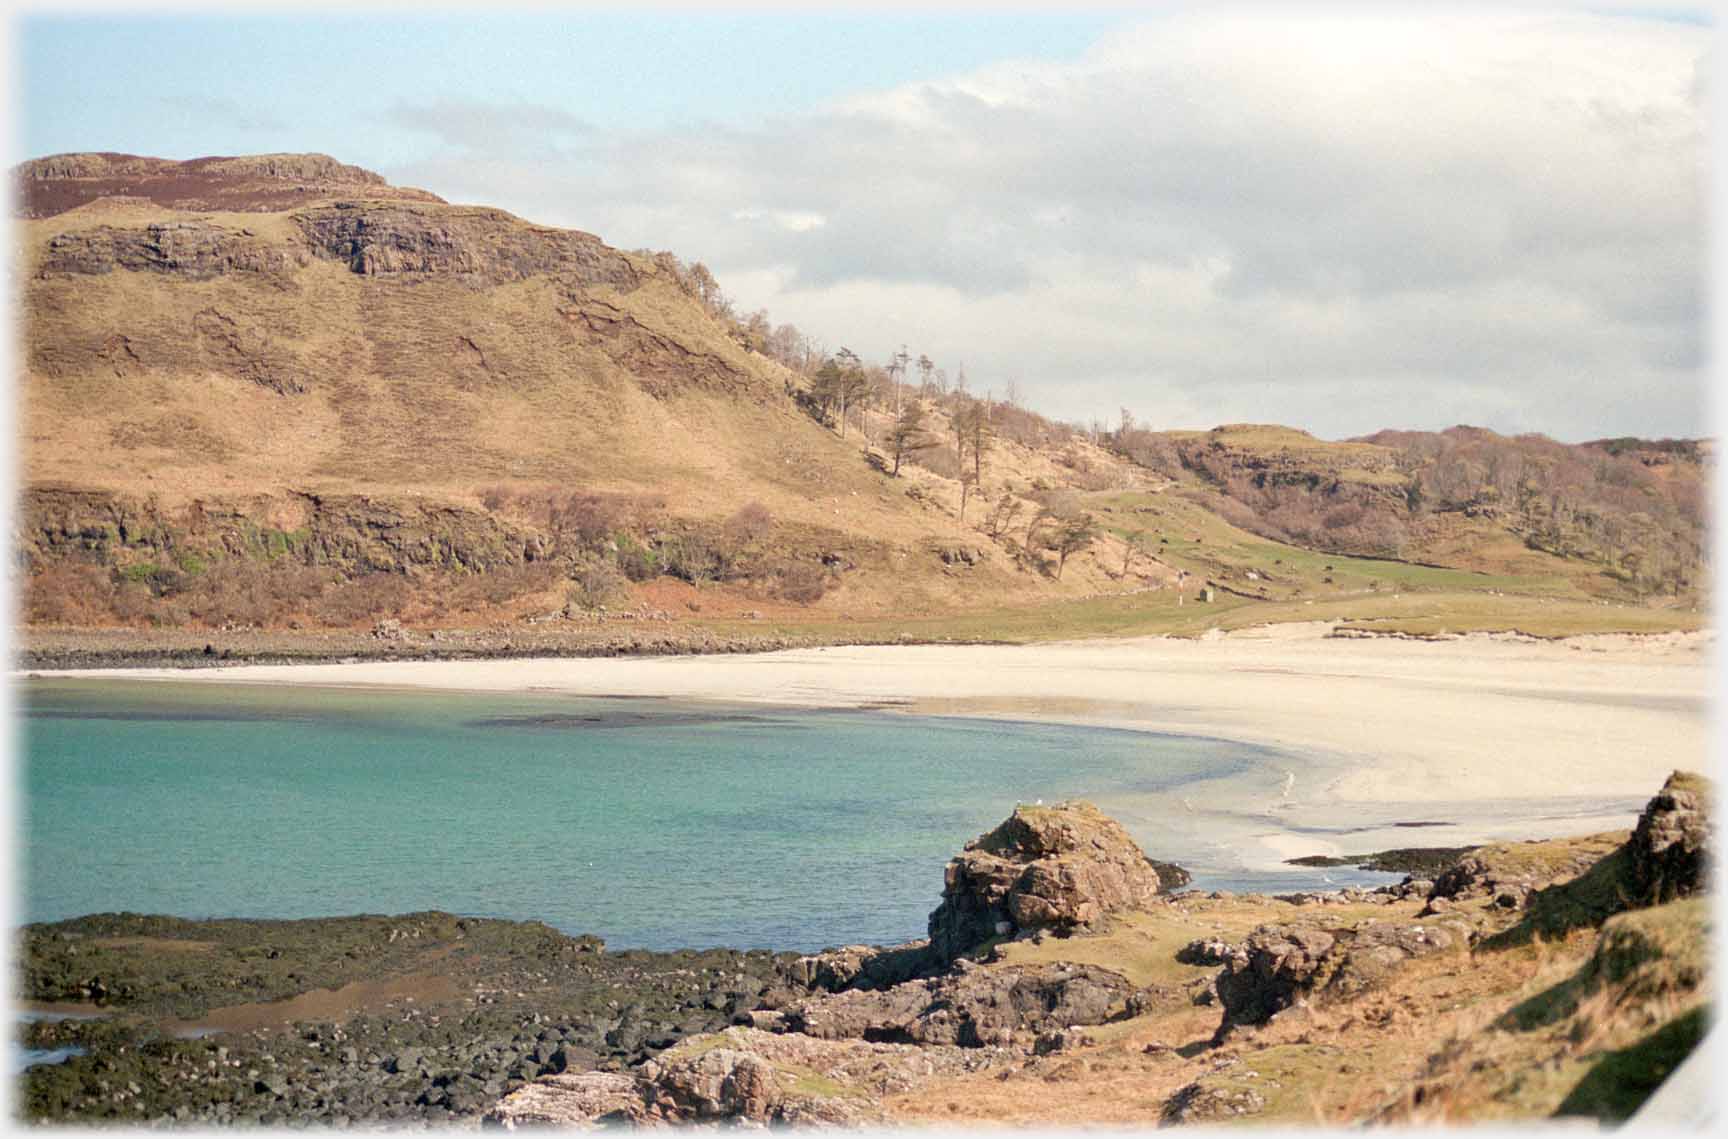 Sandy bay with turqoise water.